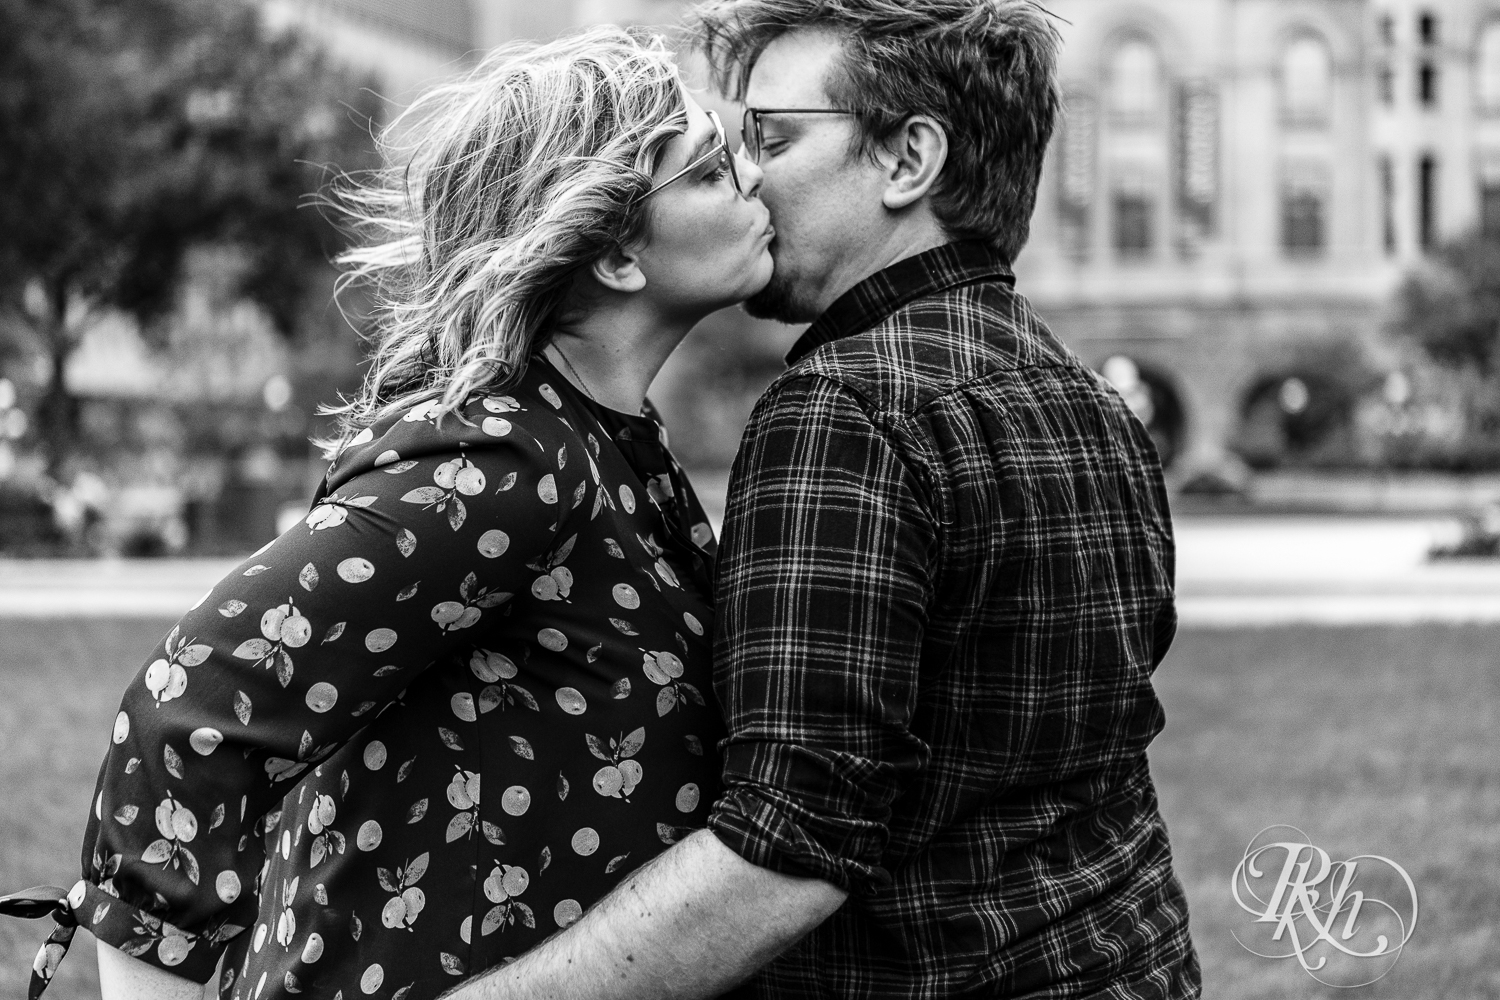 Blond woman with glasses and man with glasses kiss in Saint Paul, Minnesota.